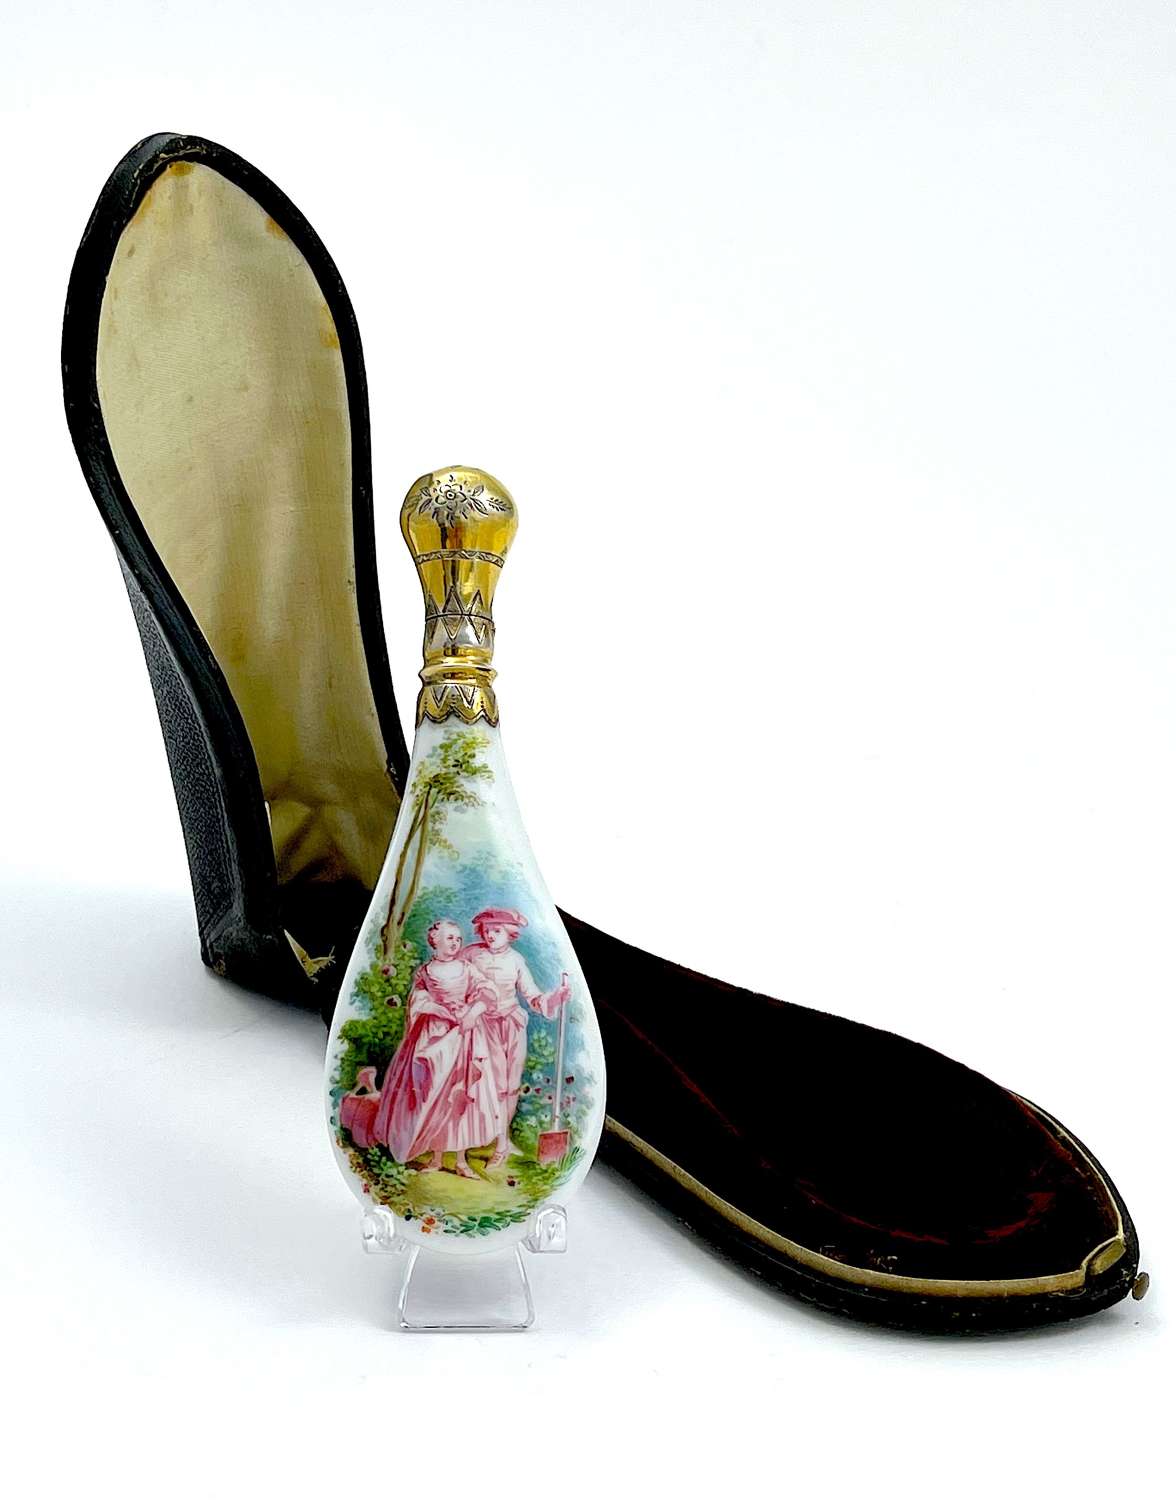 Exquisite Antique French Perfume Bottle with Original Leather Case